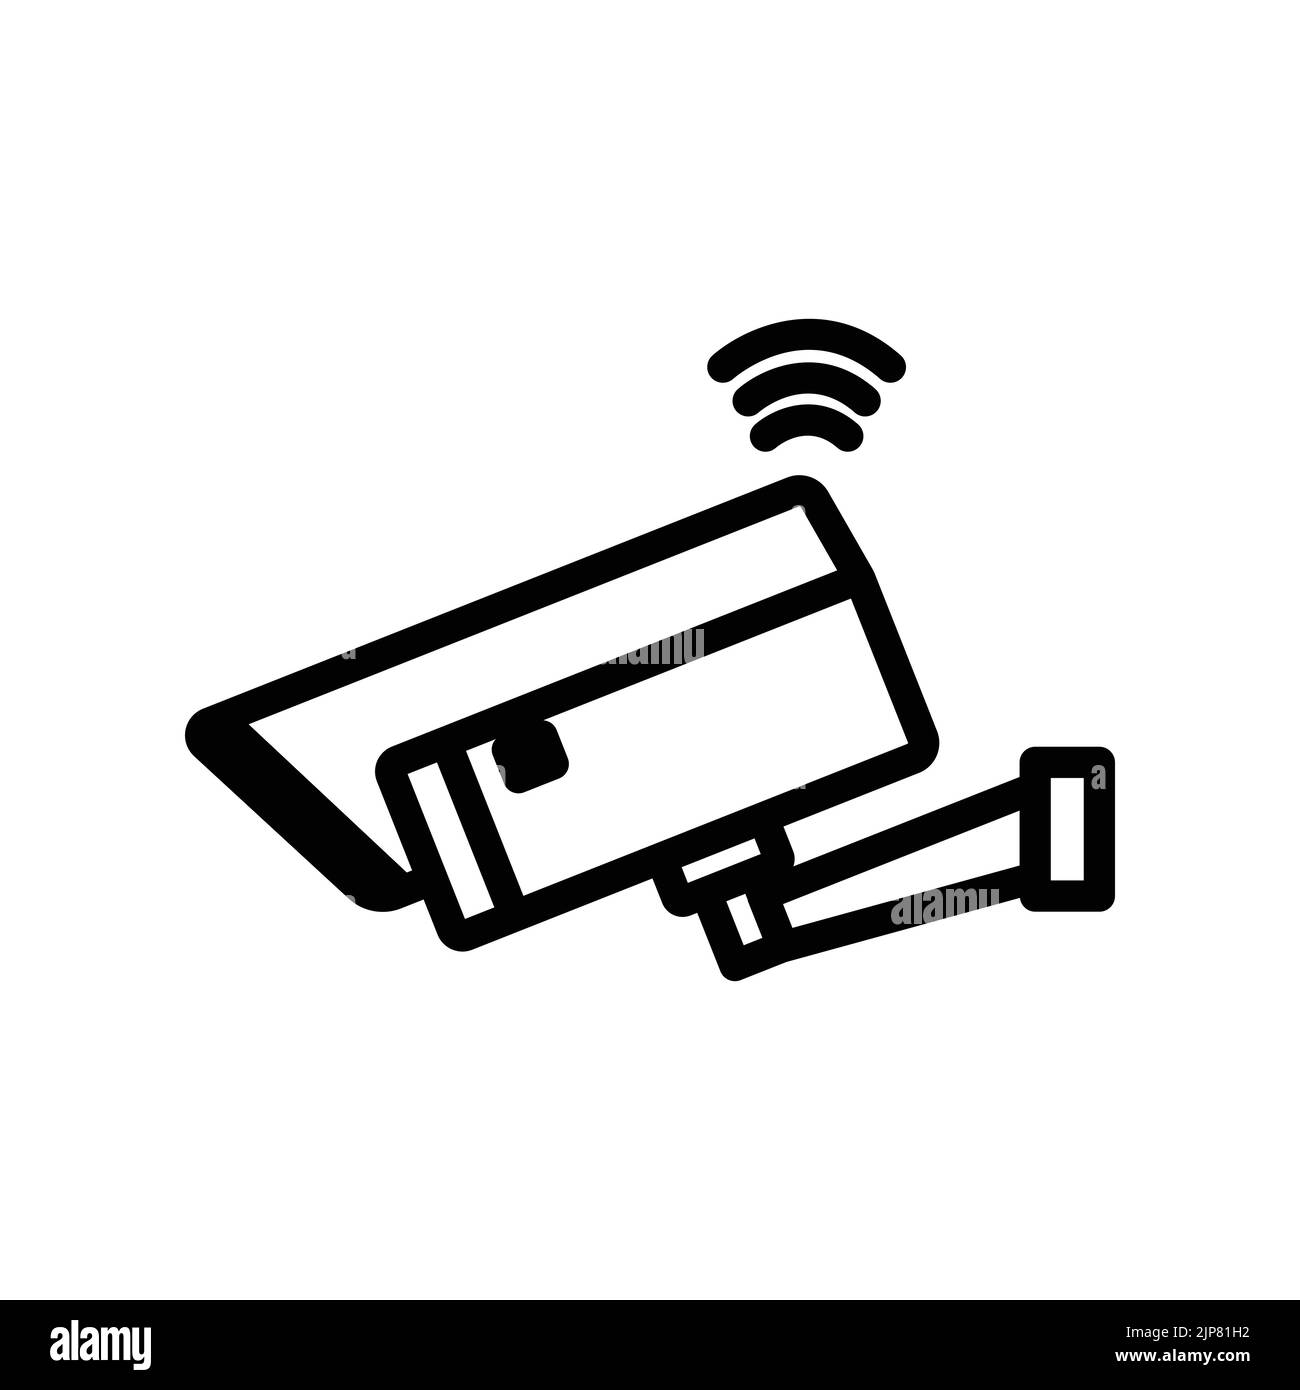 CCTV icon with signal. icon related to technology. smart device. line icon style. Simple design editable Stock Vector